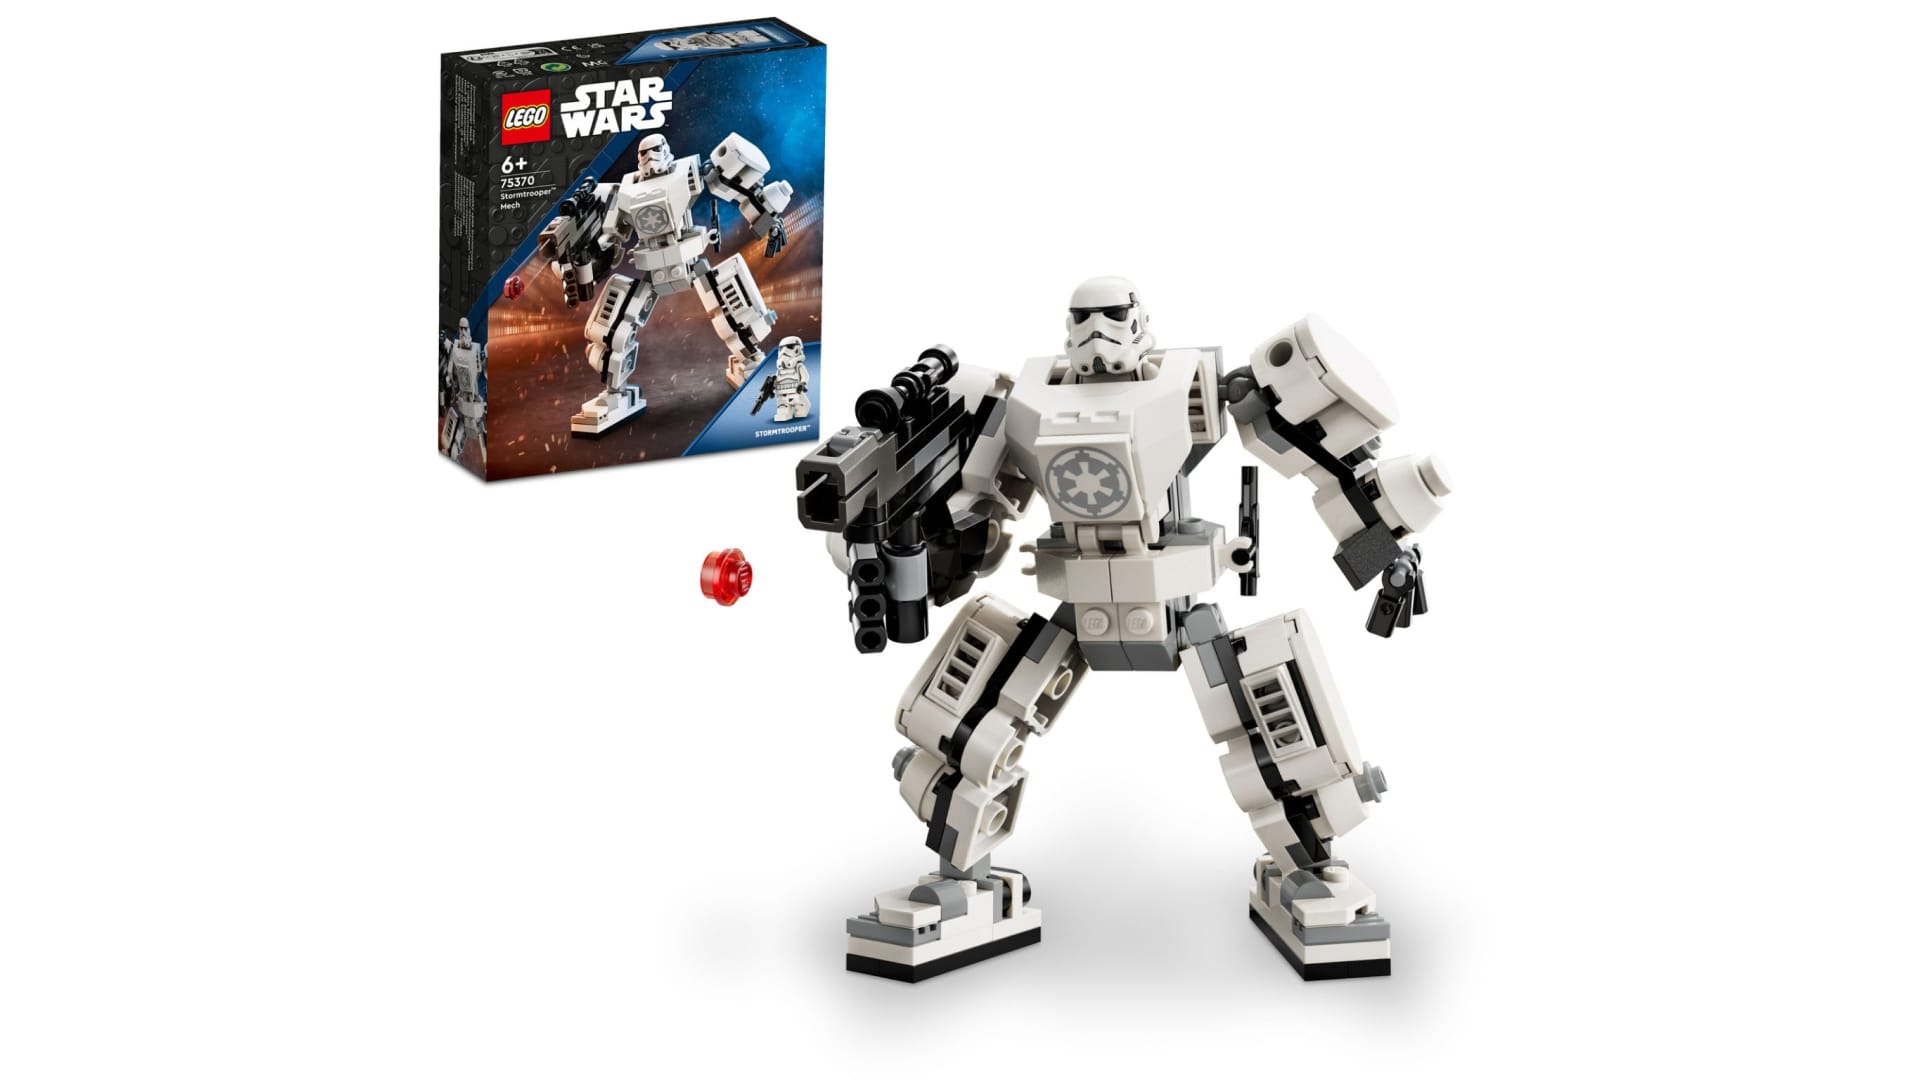 An assembled Stormtrooper standing to the right or its box.